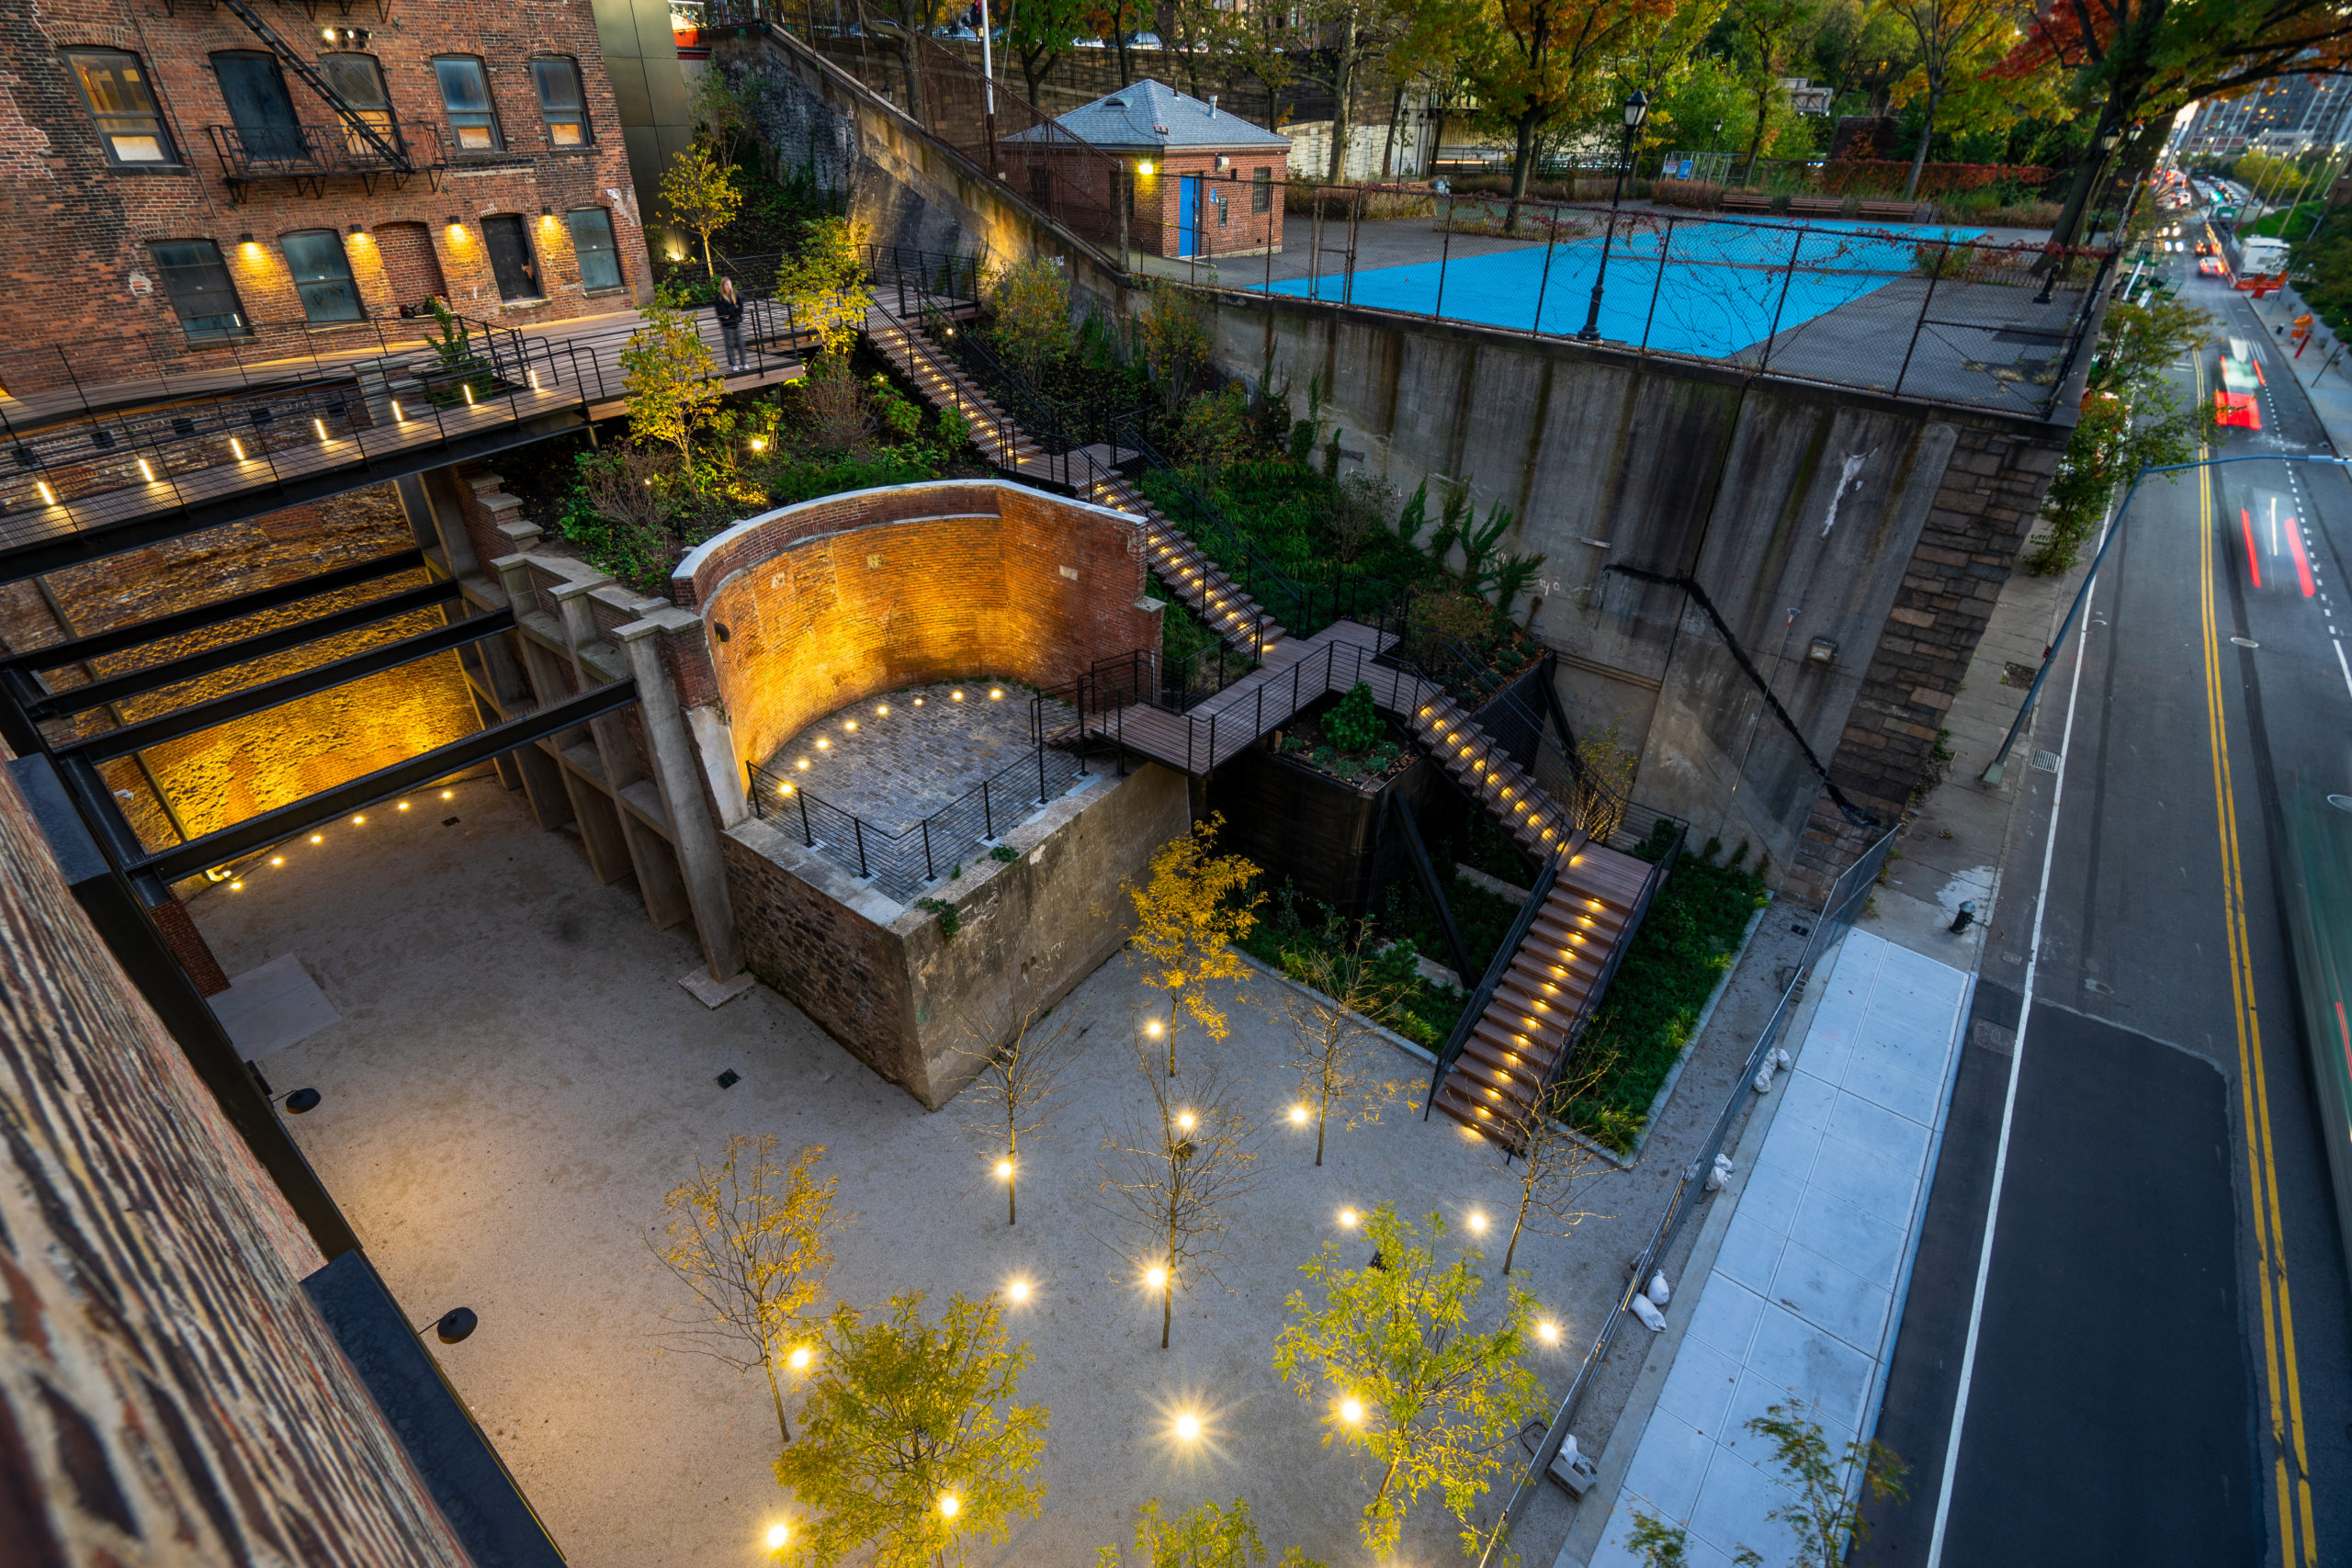 This dramatic picture shows the staircase and grove behind Panorama’s 58 Columbia Heights. Photo by Steven Tupu/Terrain-NYC